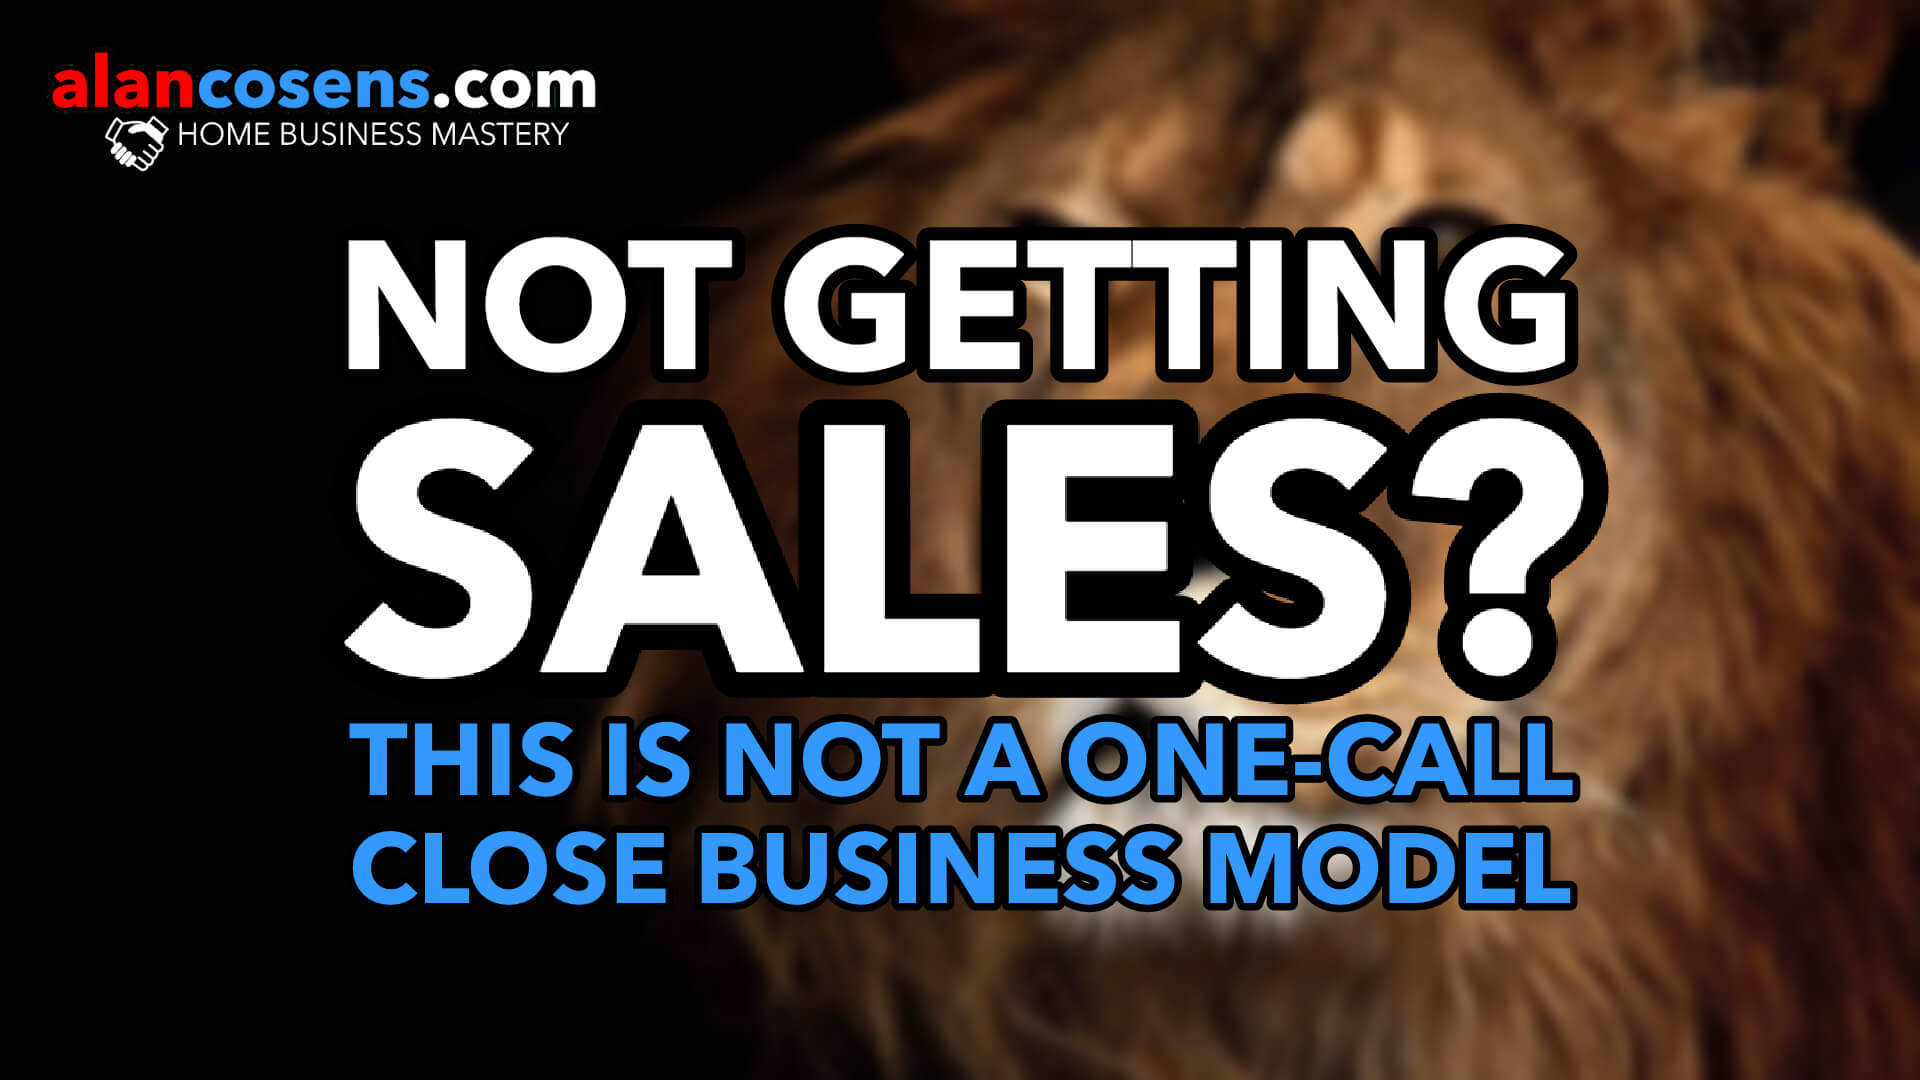 Not Getting Sales? This Is Not a One-Call Close Business